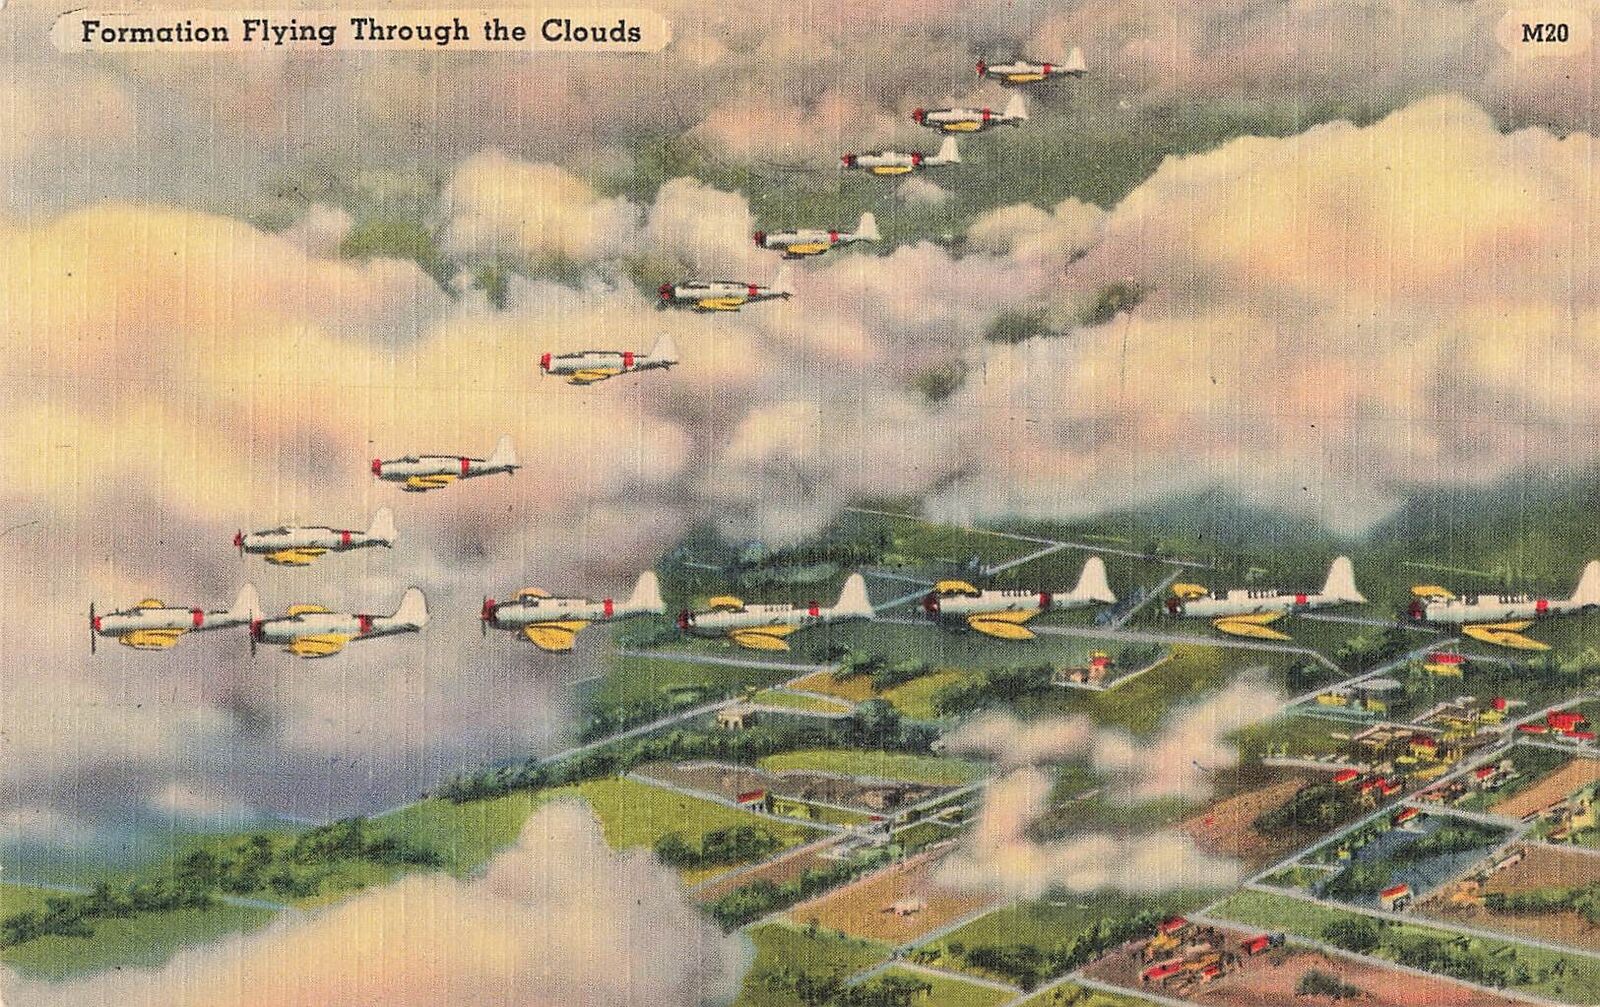 Vintage Postcard Formation Flying Through the Clouds, U.S. Navy, WW2